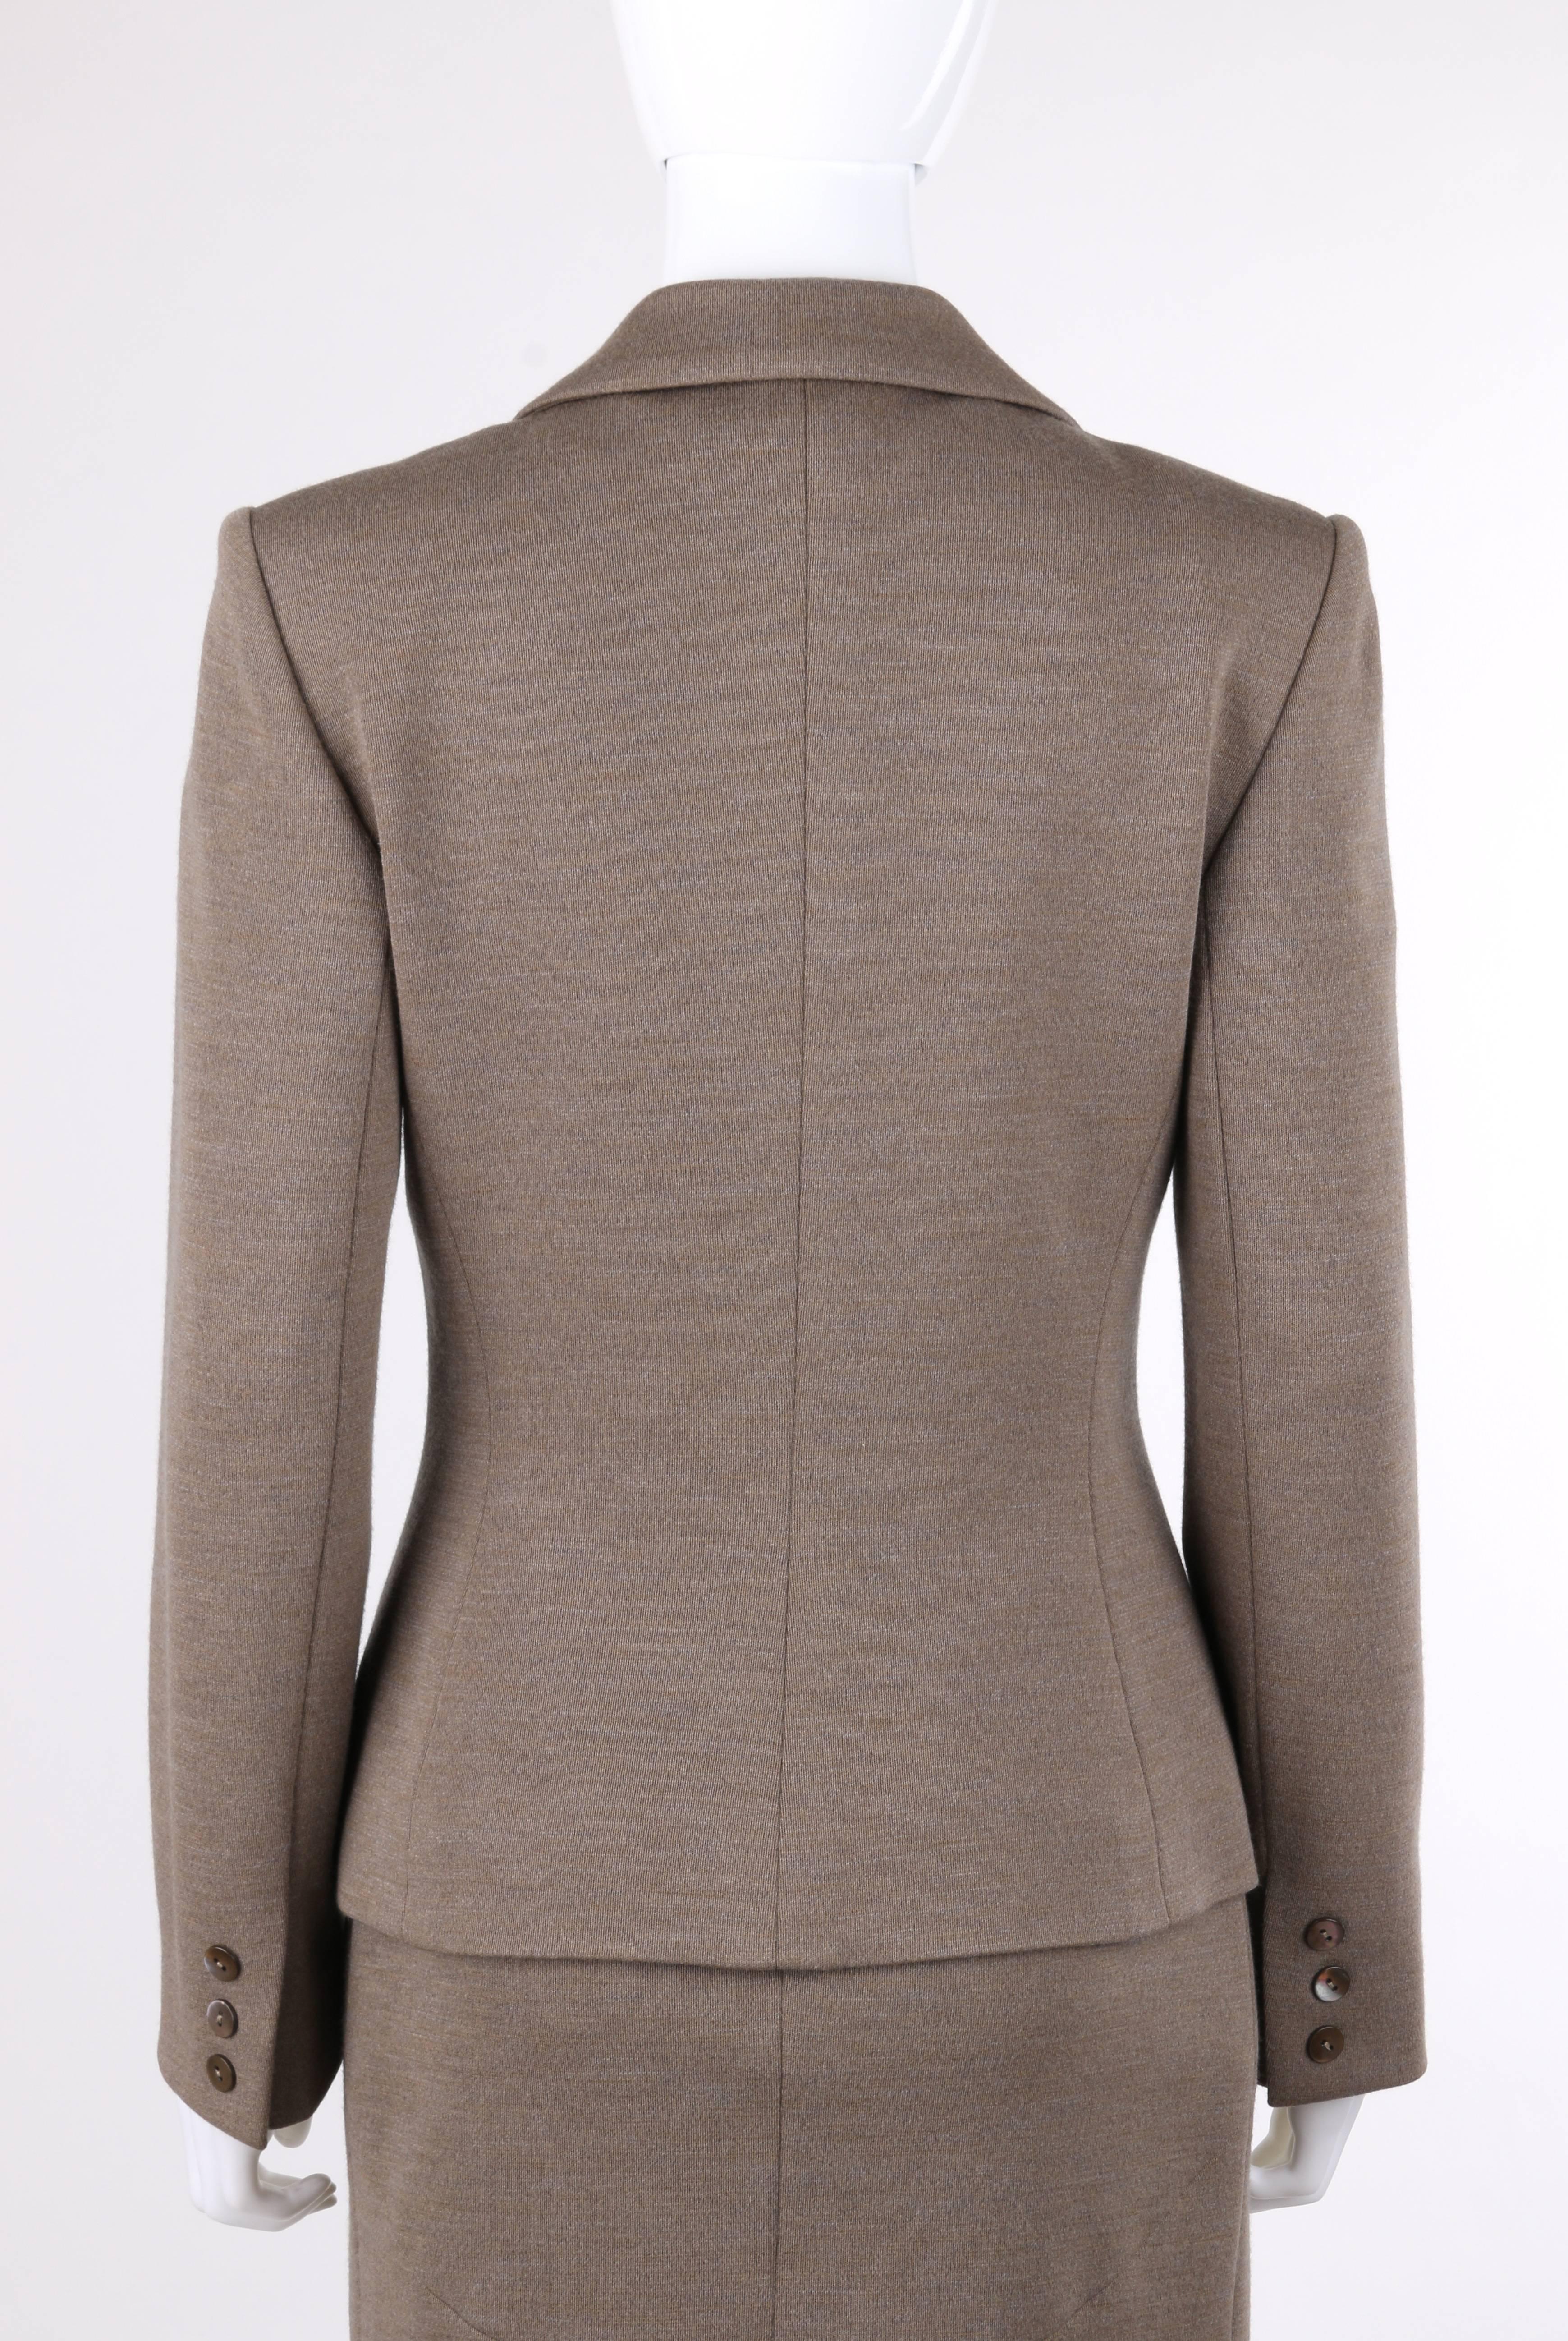 GIVENCHY Couture A/W 1998 ALEXANDER McQUEEN 2 Piece Wool Blazer Dress Suit Set In Excellent Condition In Thiensville, WI